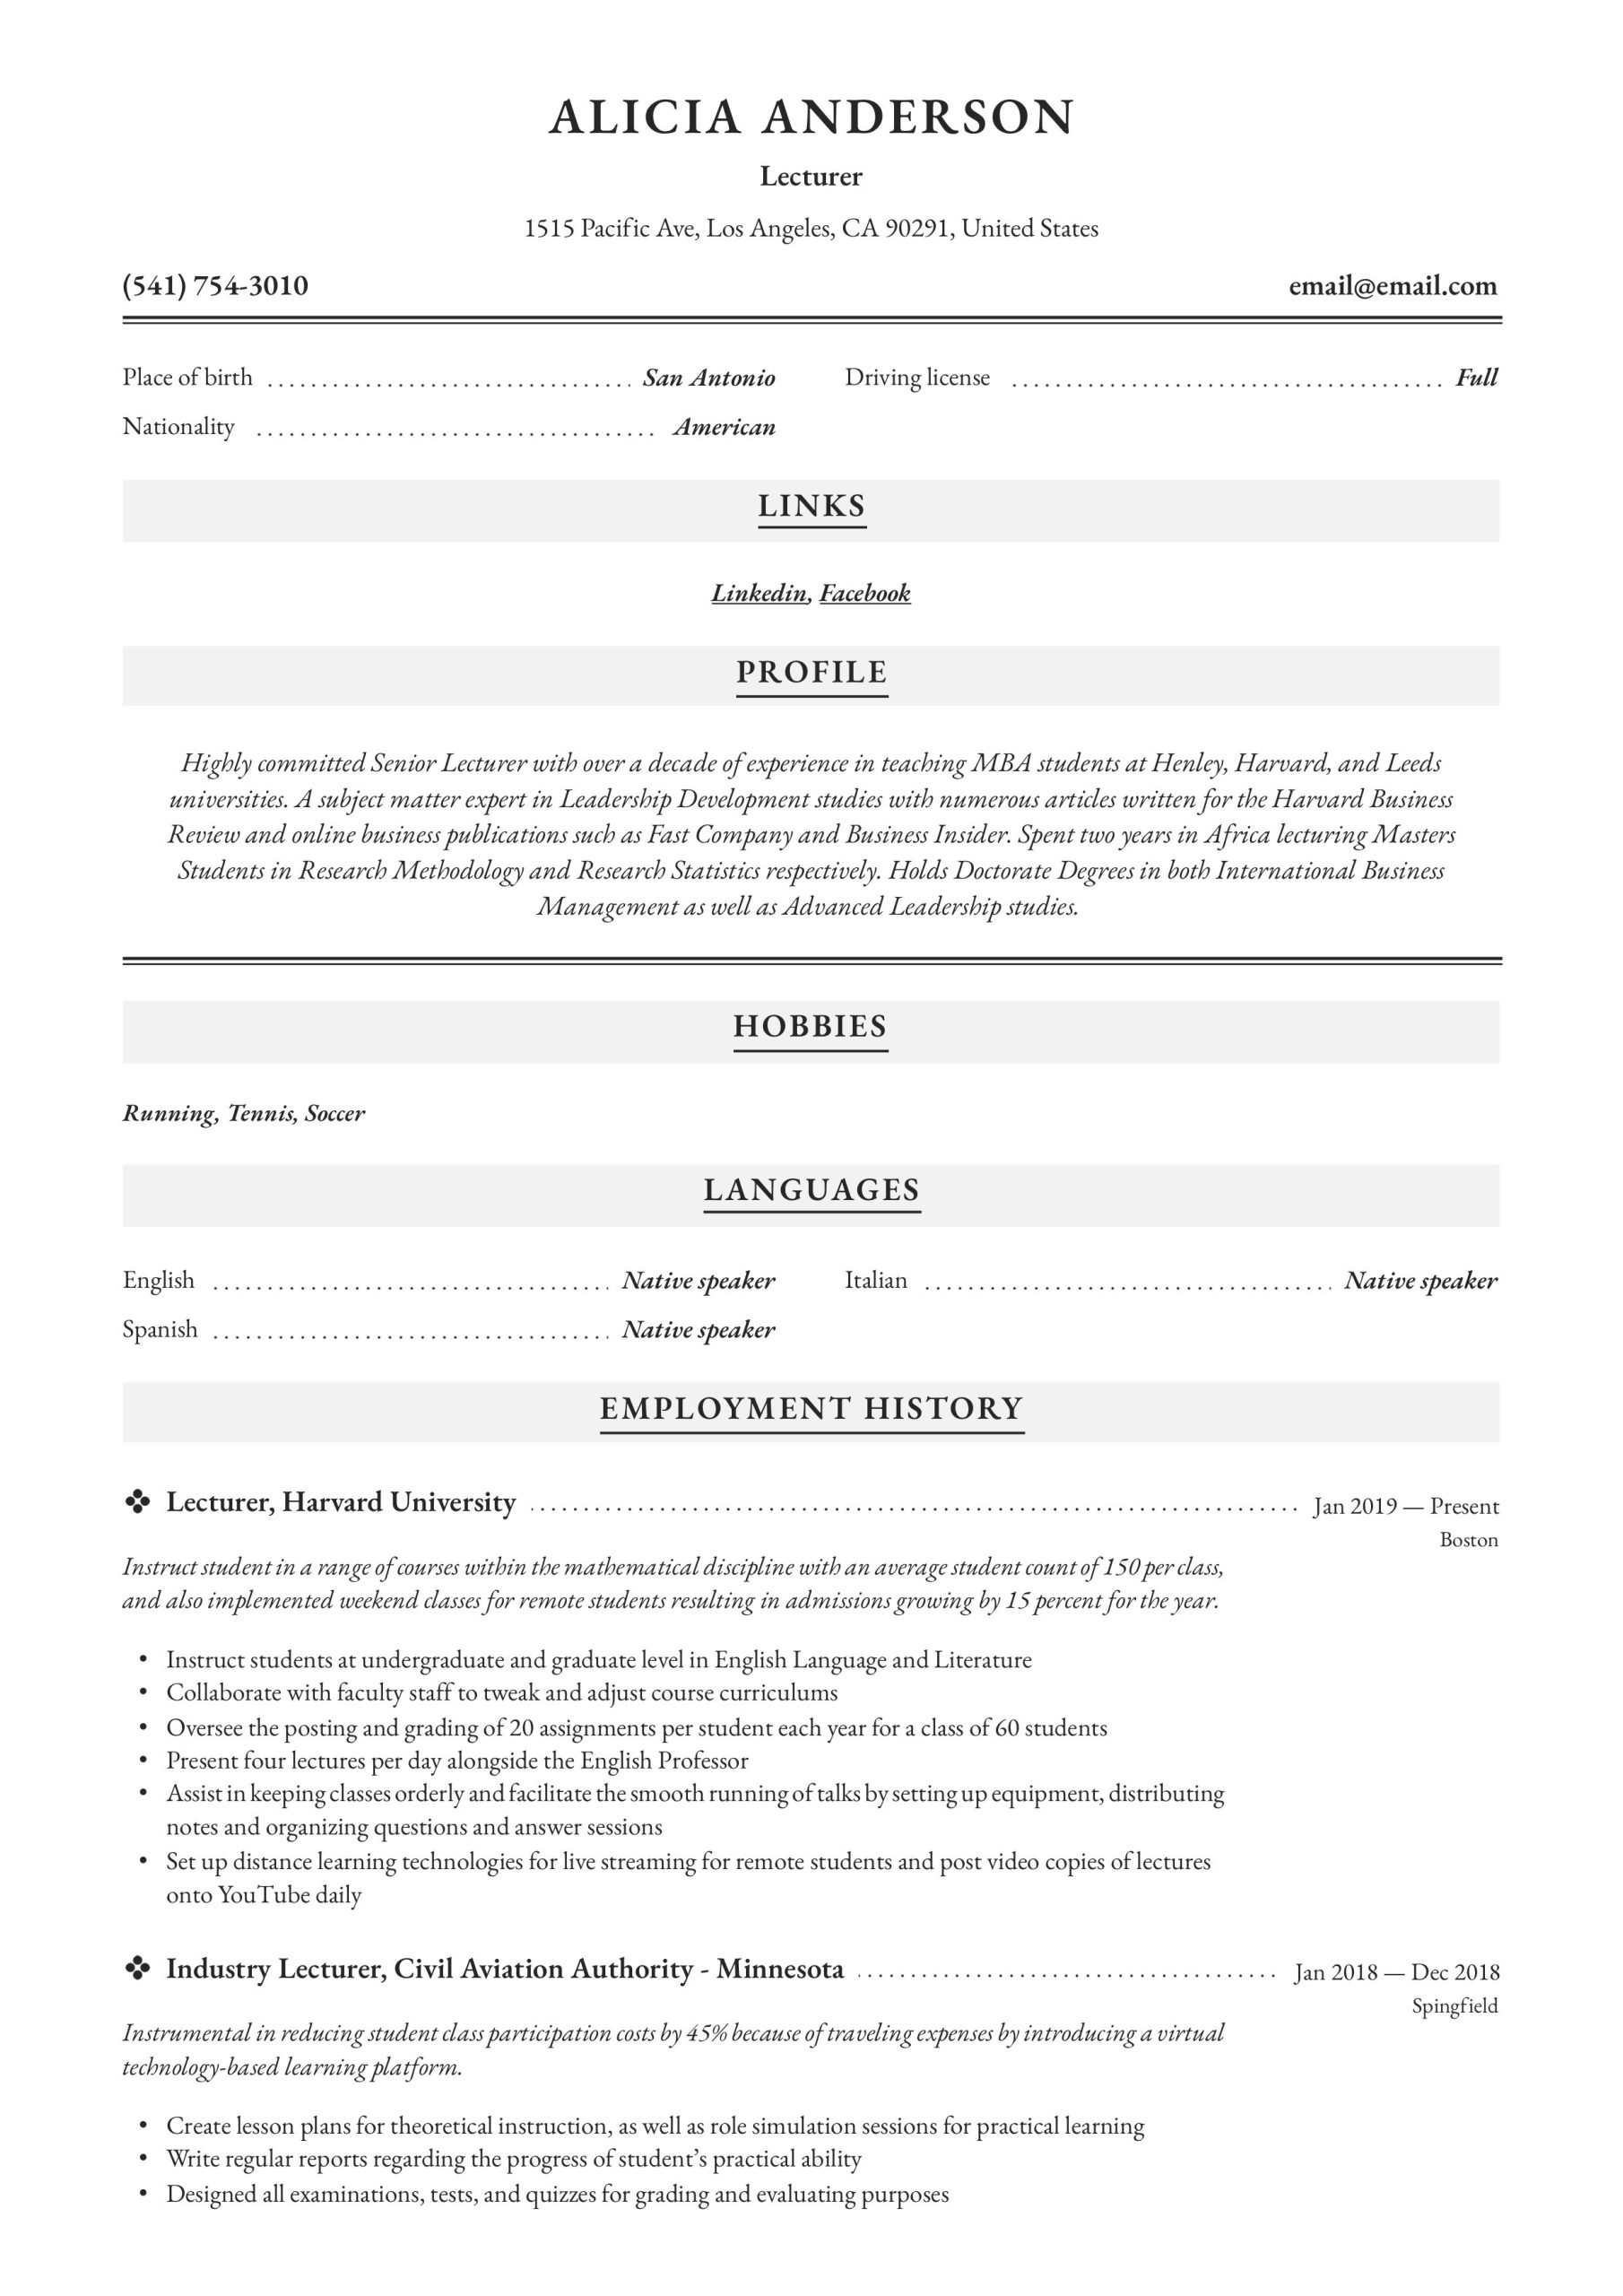 Resume Samples for Academic Positions In Education Education Resume Examples & Guides 2022 Pdf’s